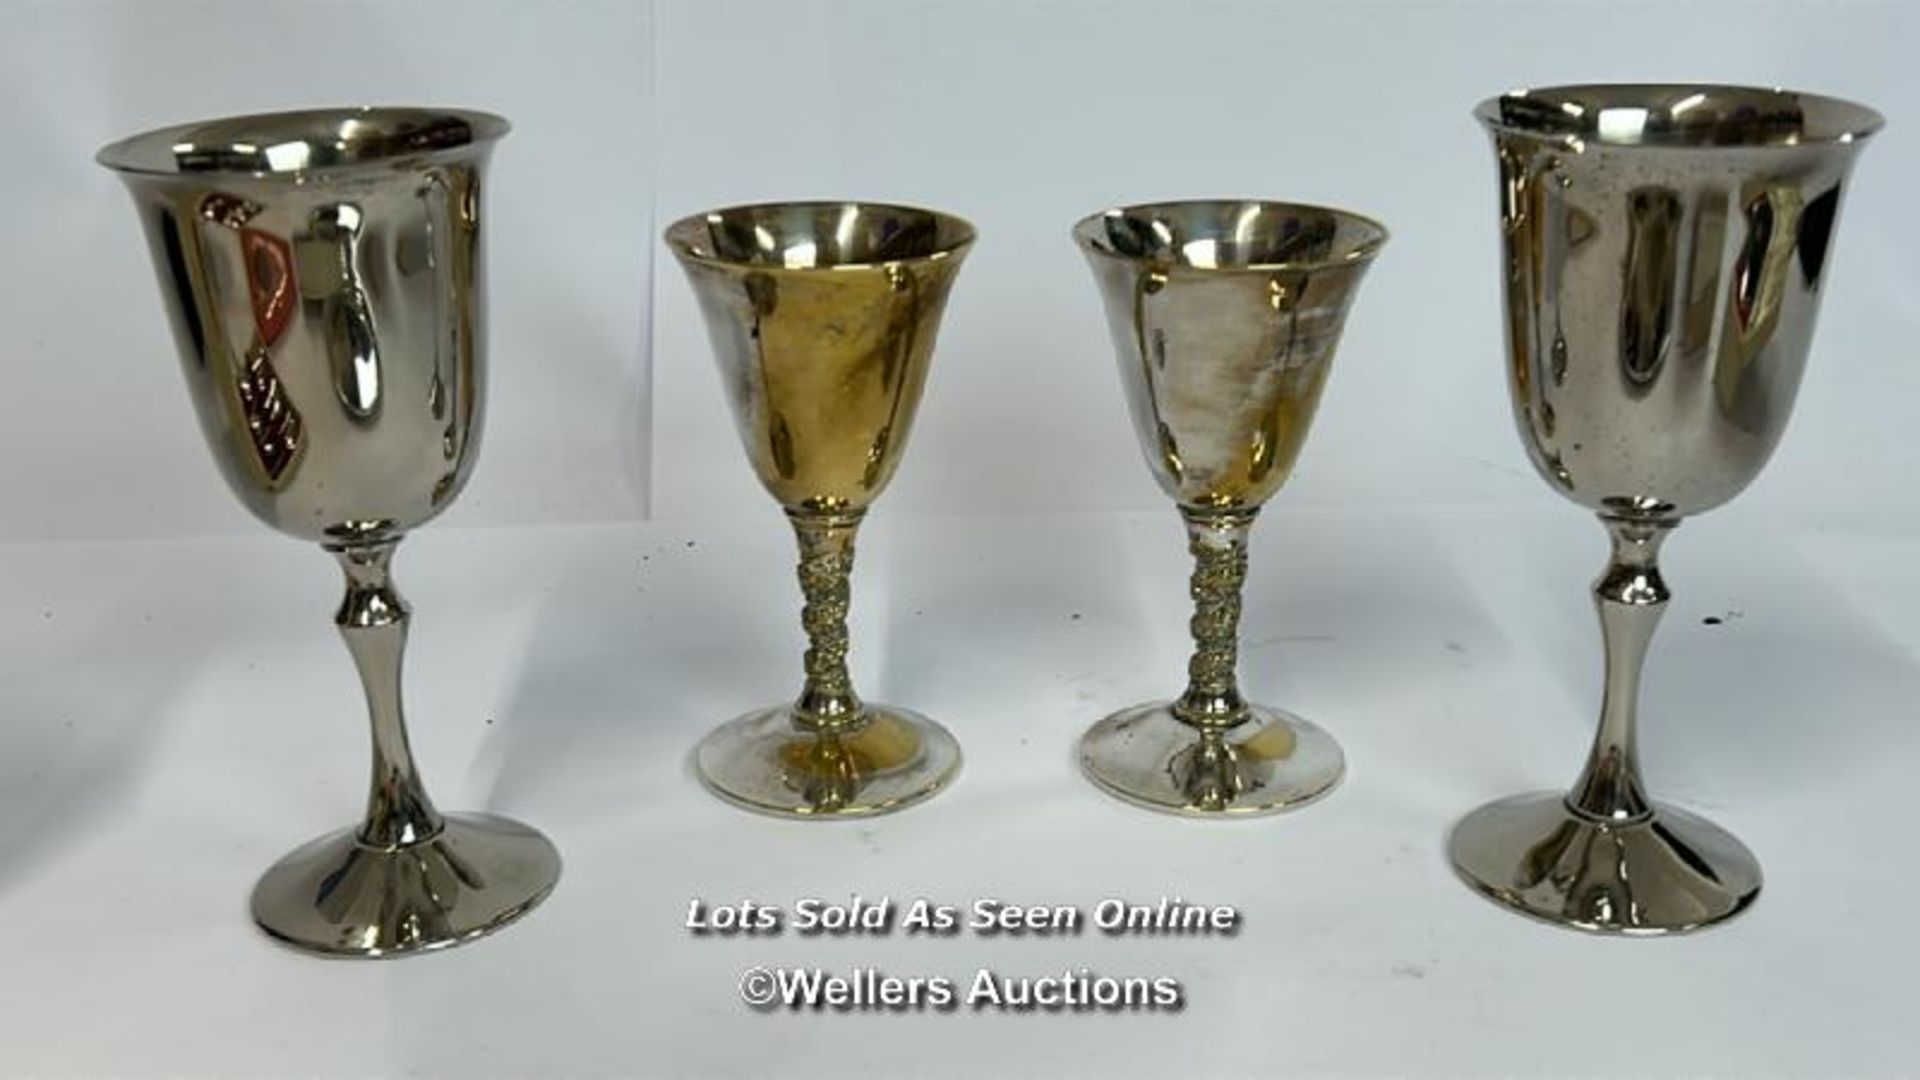 Two hallmarked silver top dressing table jars c1930, siver weight 29g, with variouse silver plate - Image 11 of 12